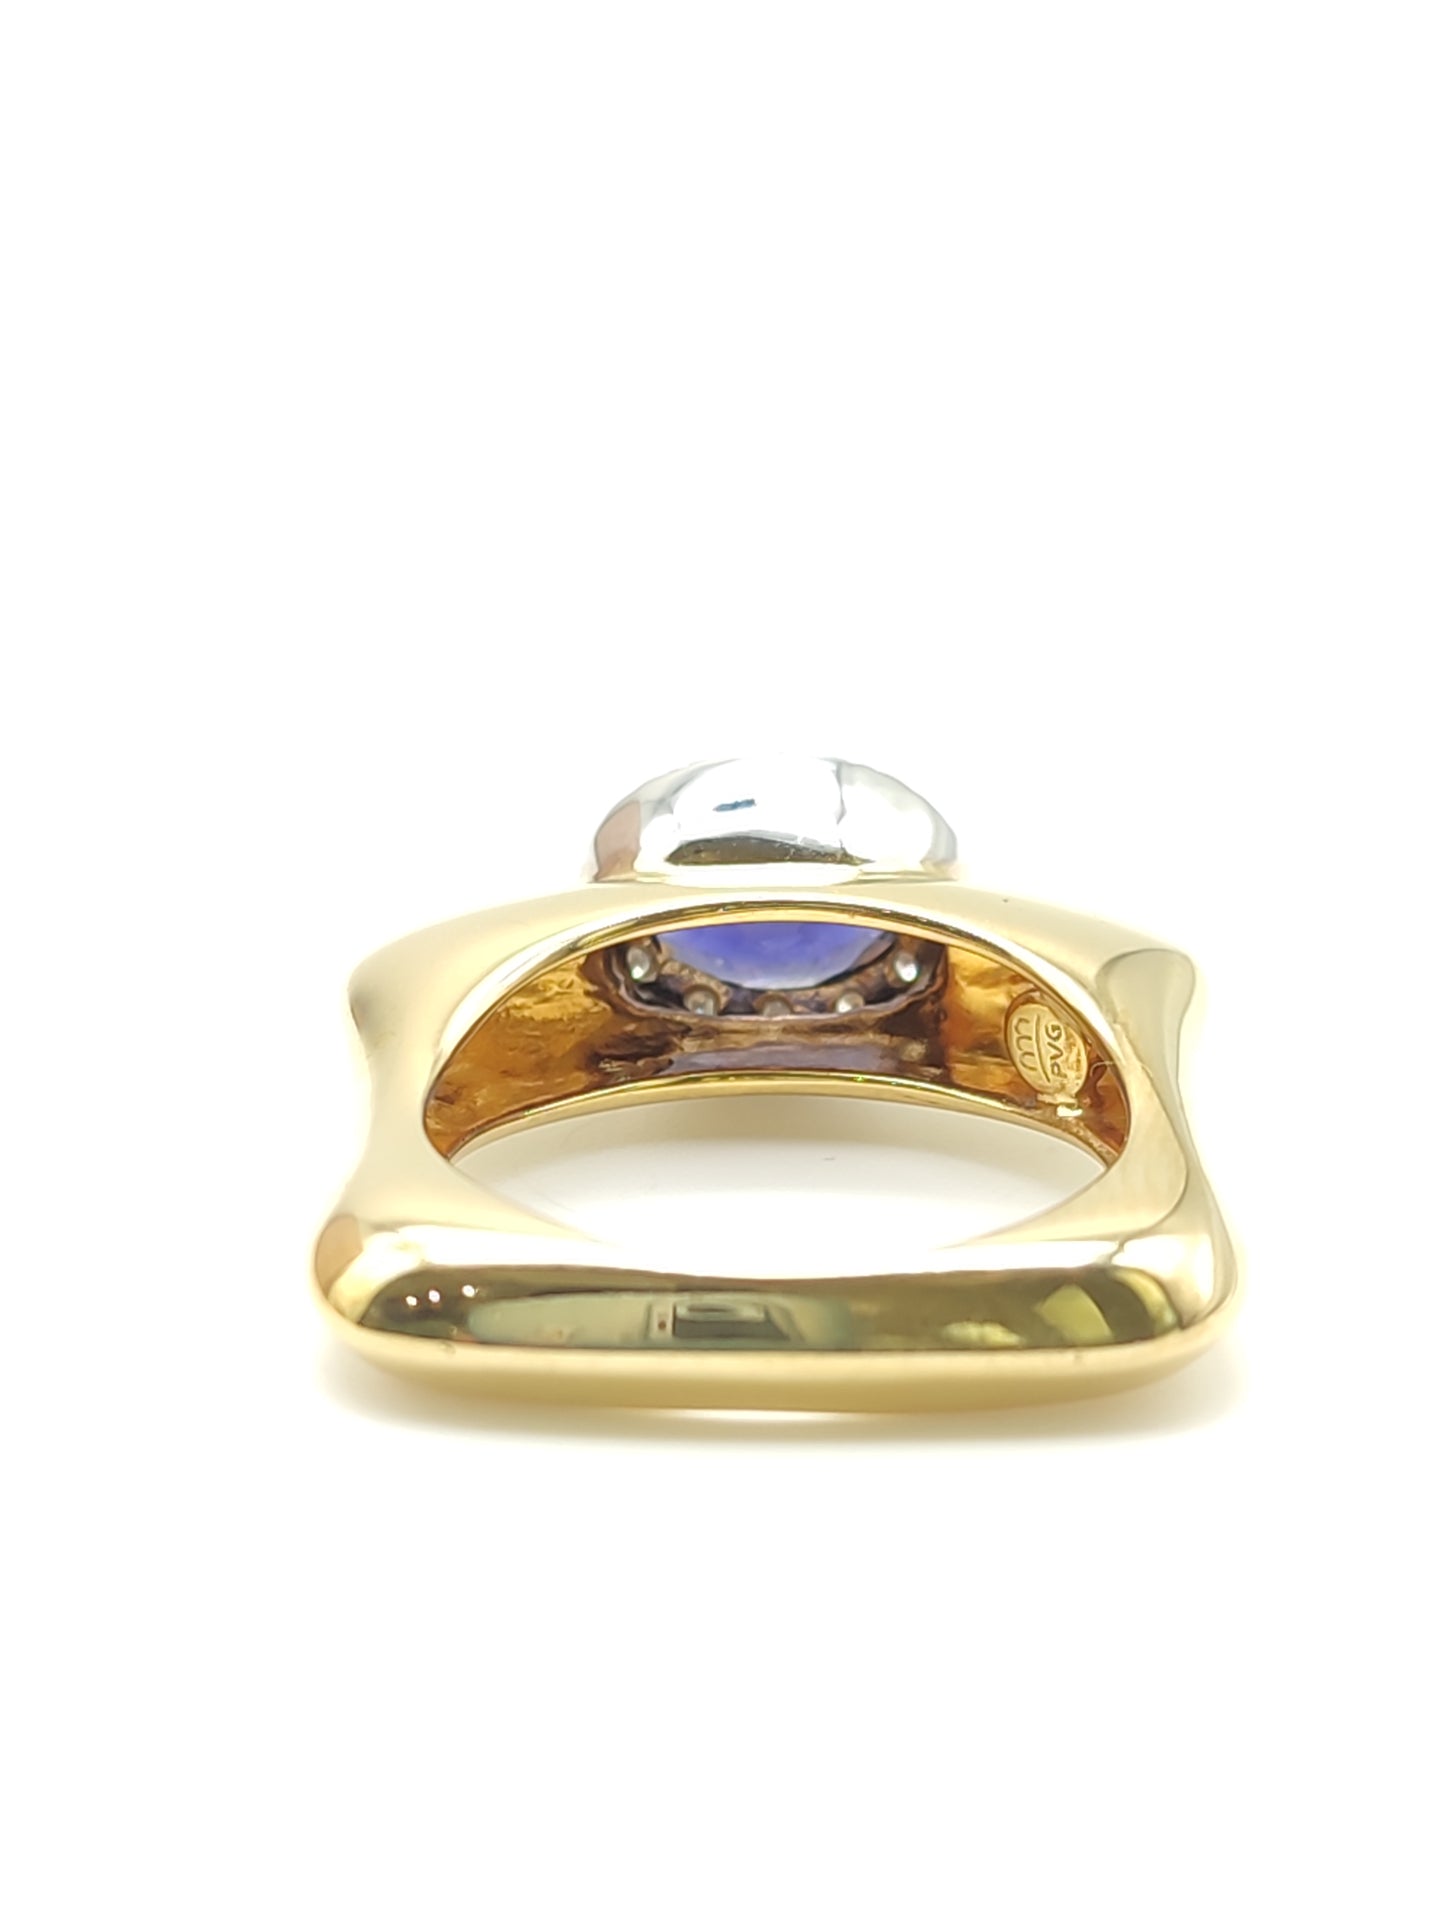 Pavan - Gold ring with Iolite and diamonds